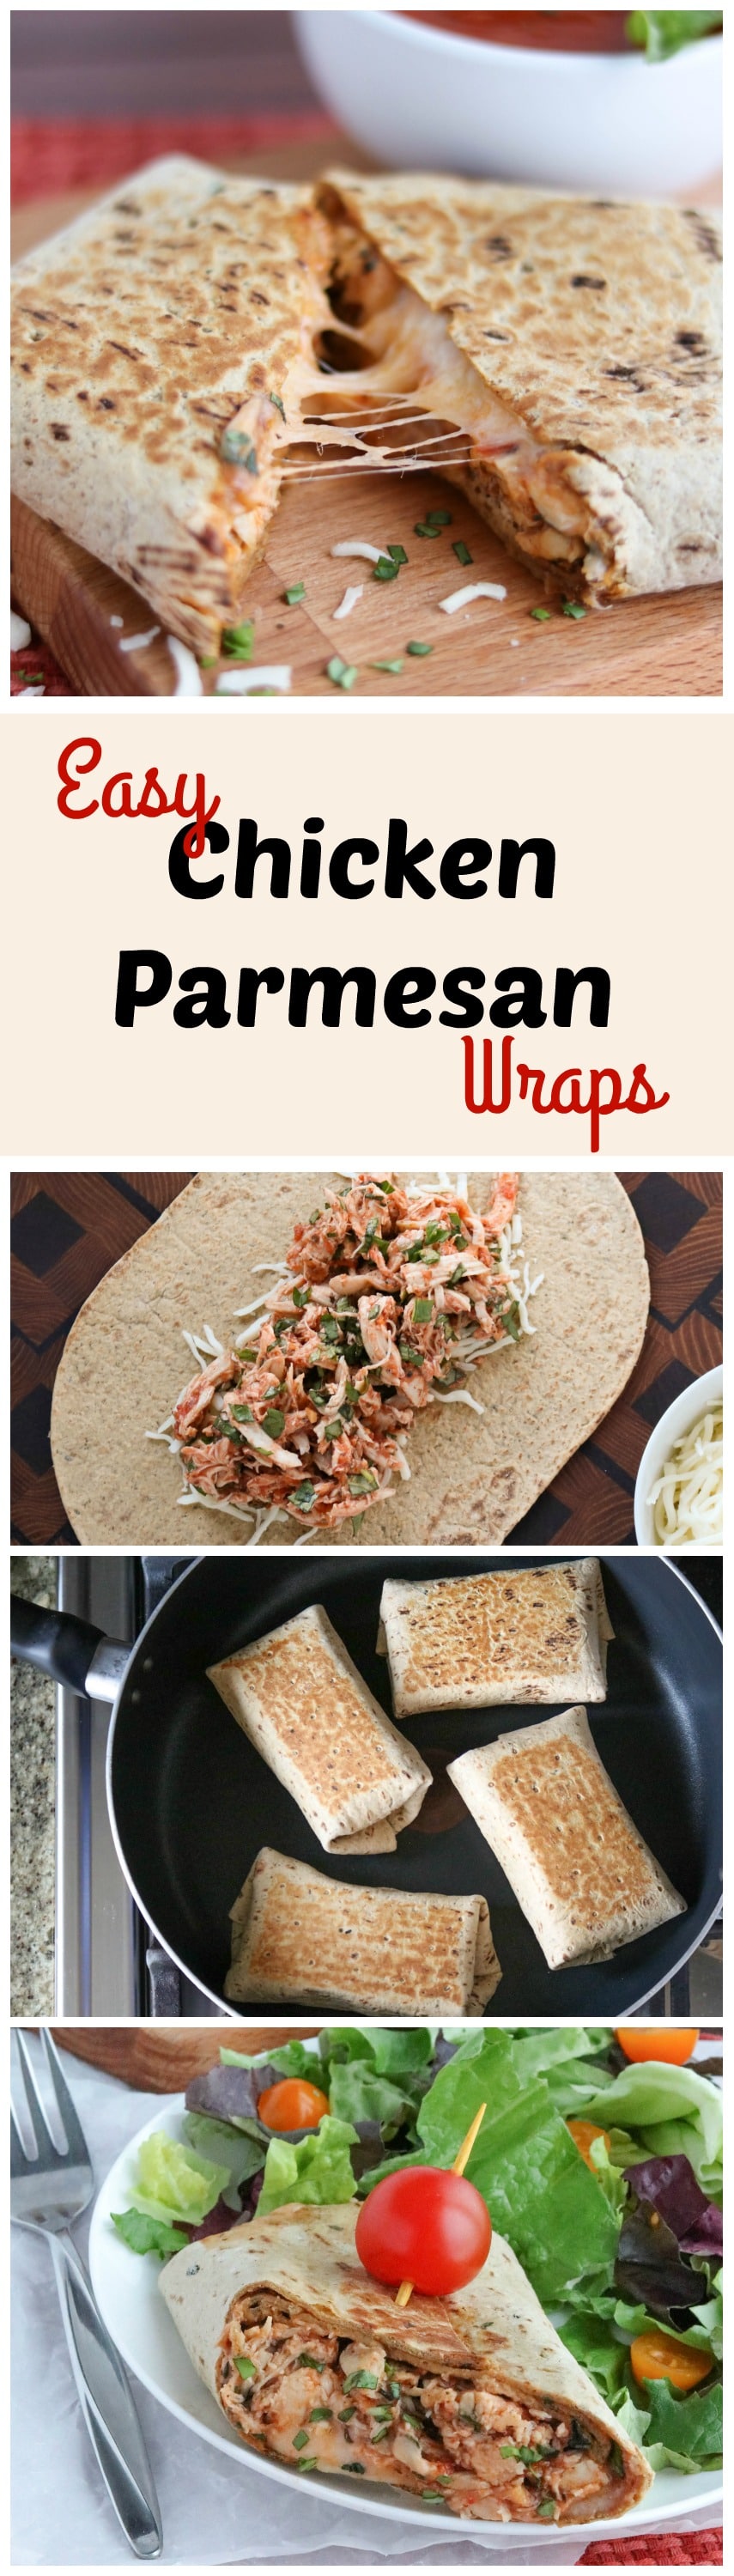 Easy Chicken Parmesan Wraps AD {www.TwoHealthyKitchens.com}